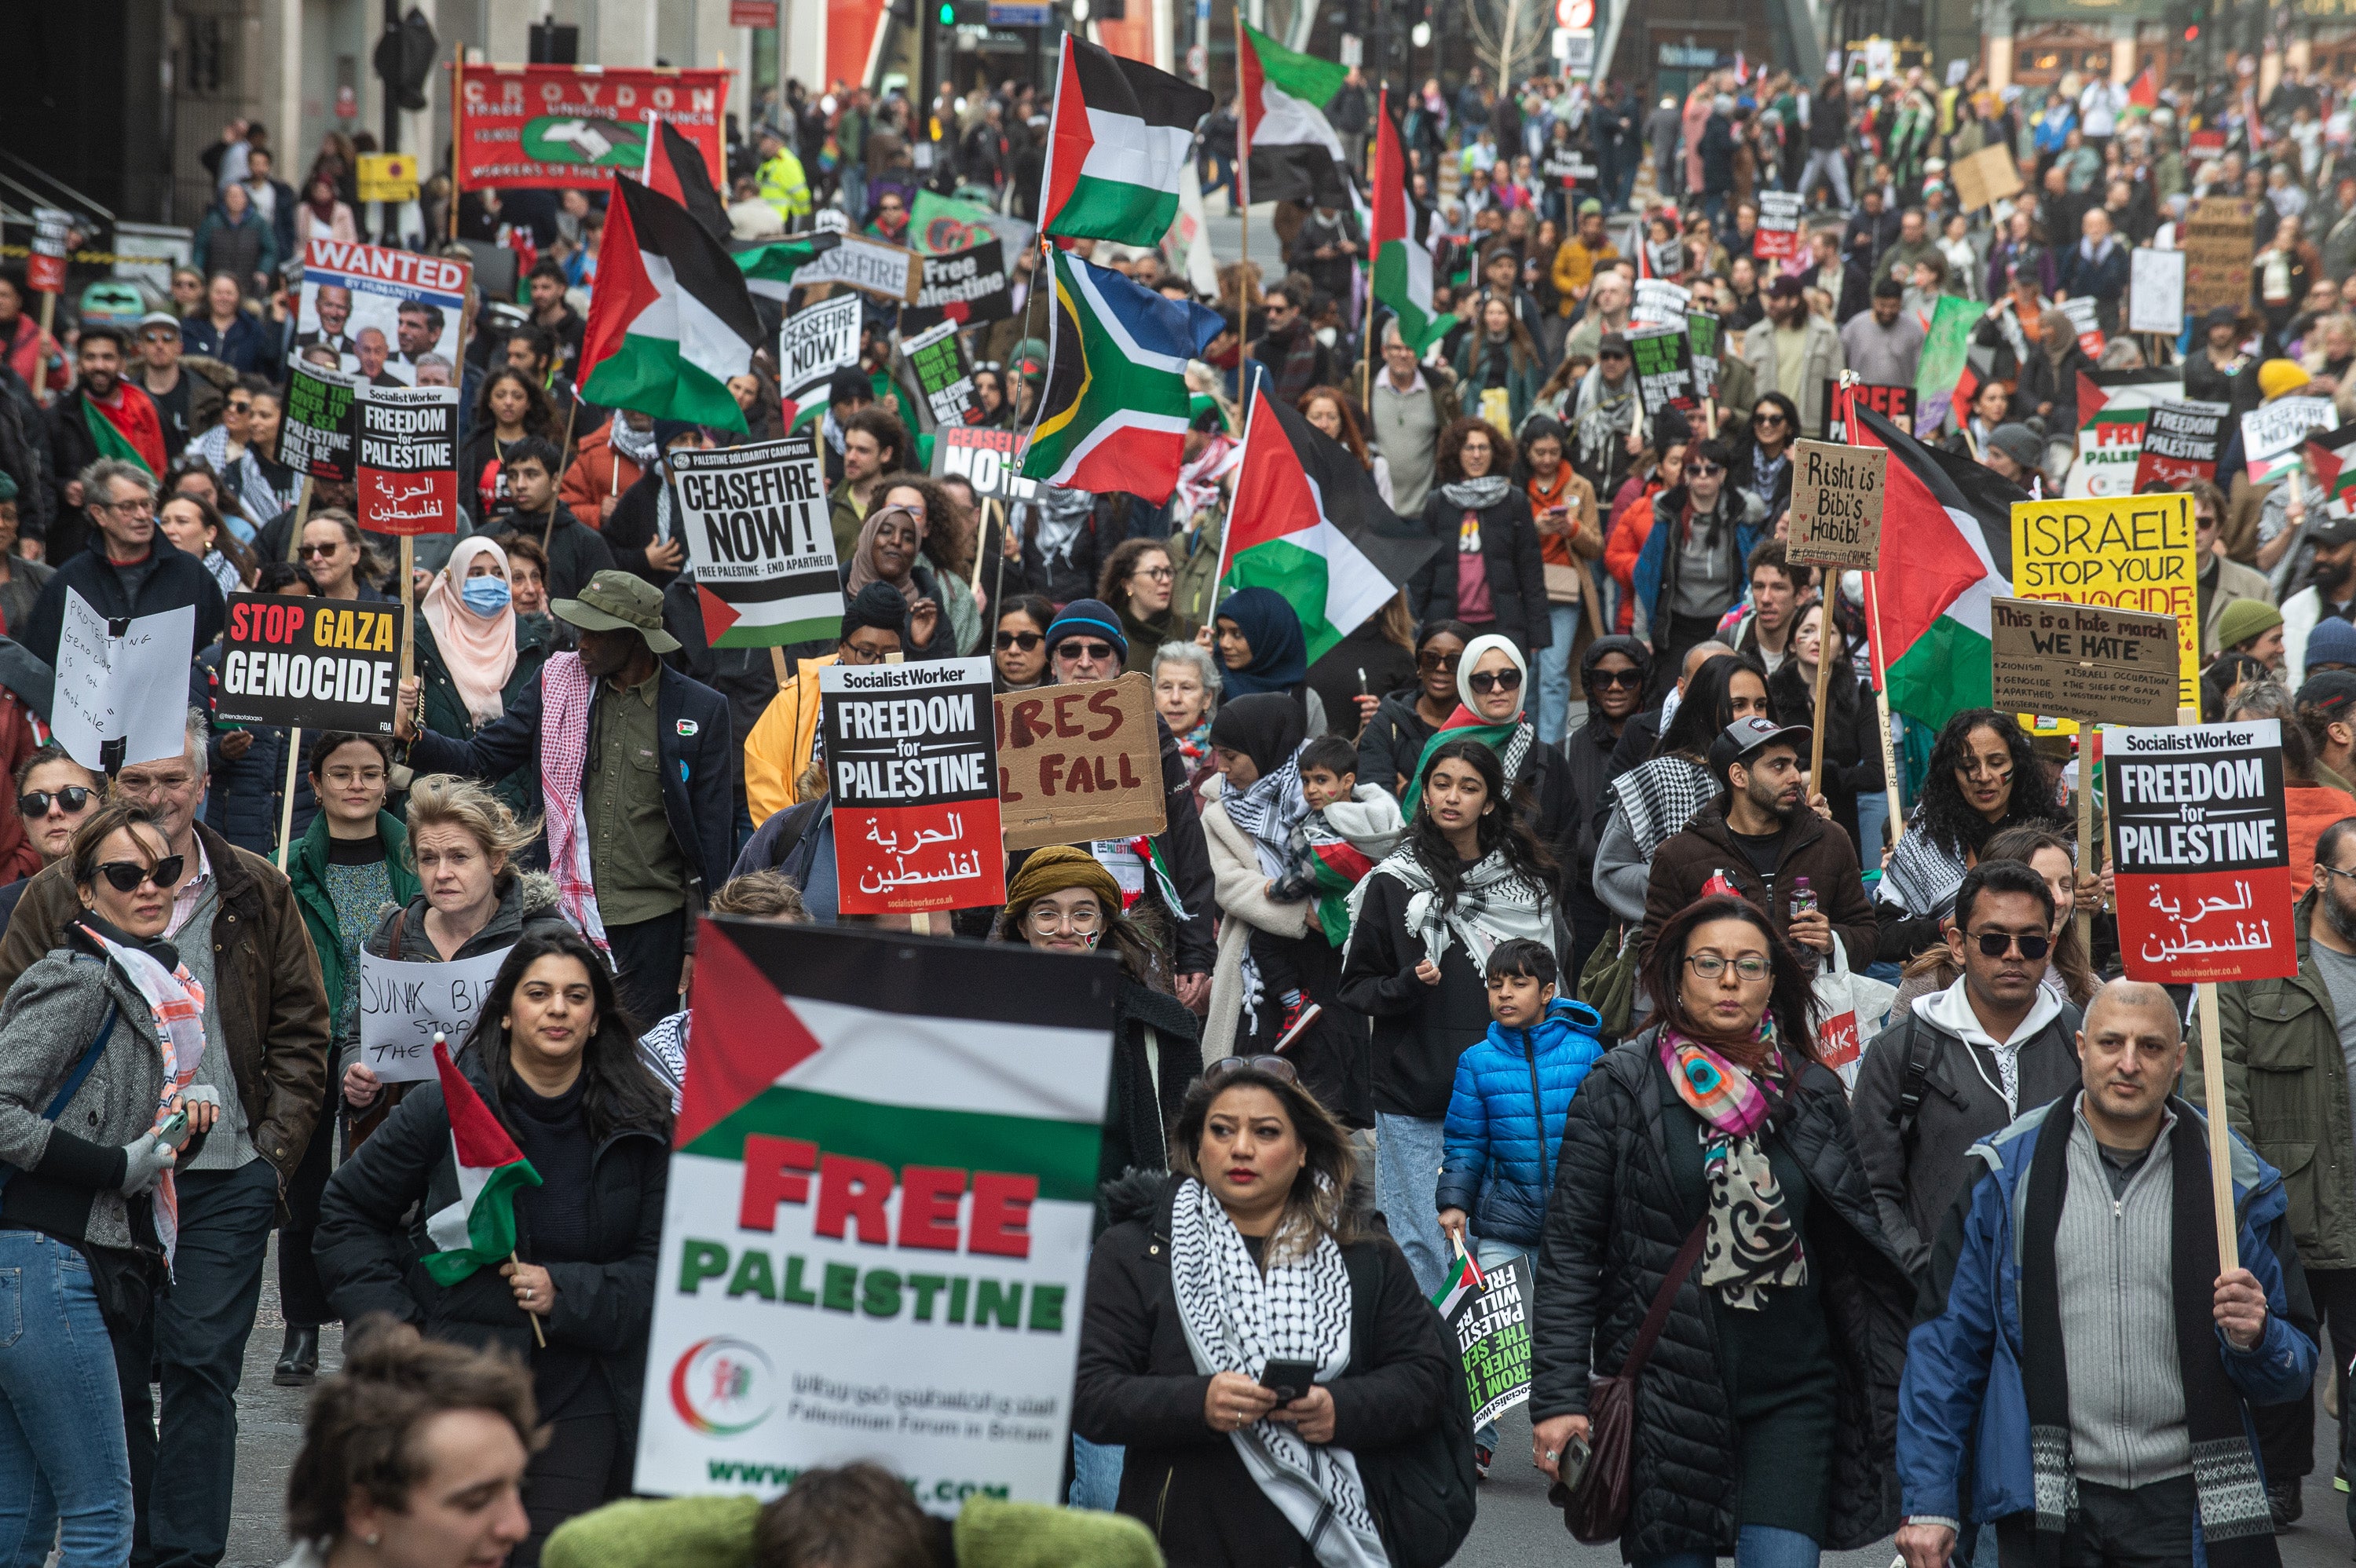 Thousands attended the pro-Palestine march in central London on Saturday, which began in Hyde Park Corner and ended outside the US embassy in Nine Elms